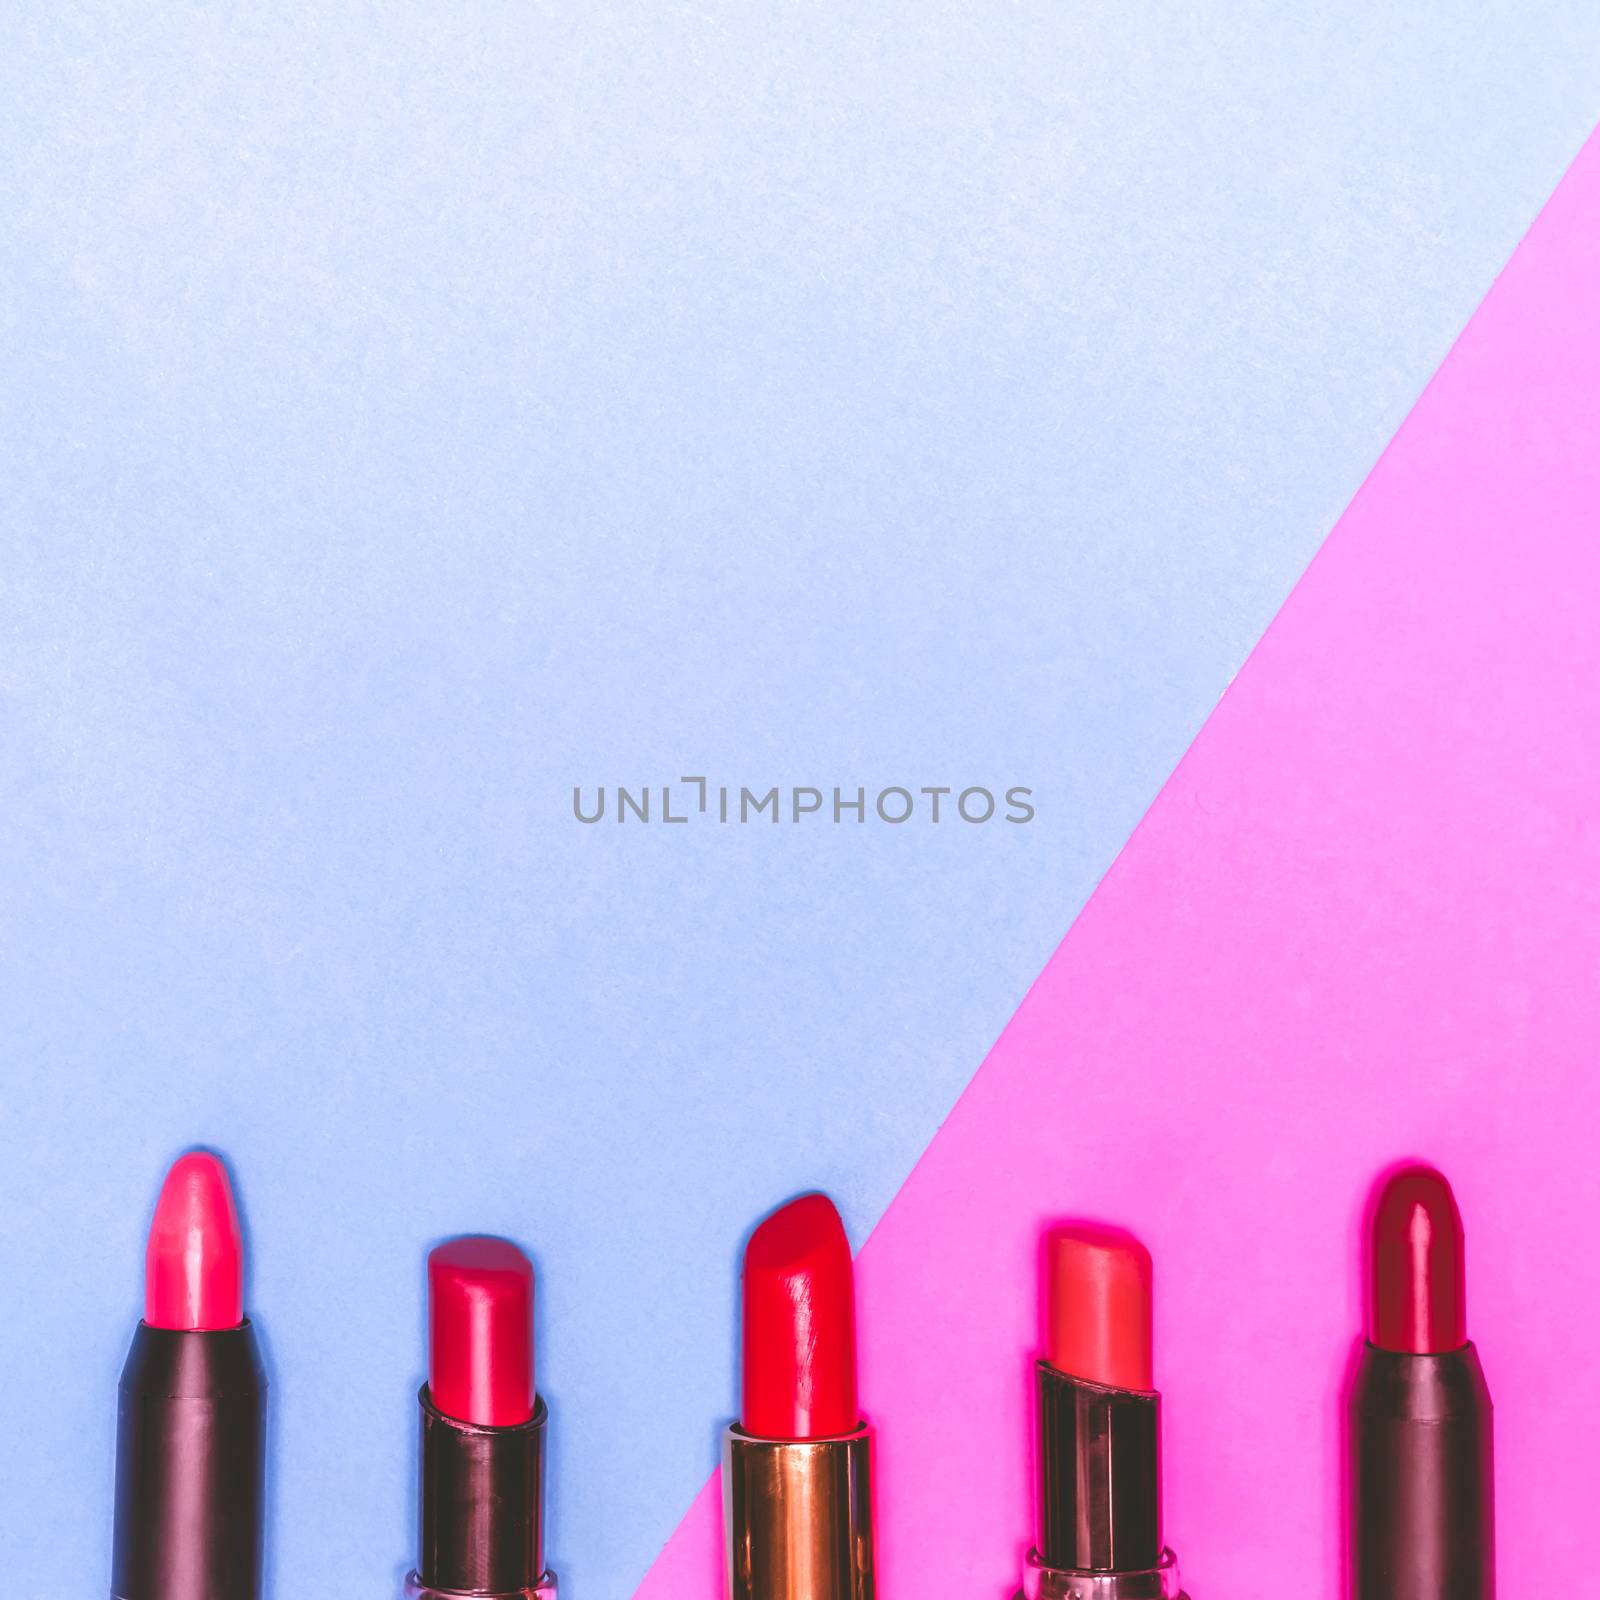 Lipsticks on colorful background.  Makeup and Beauty concept by ronnarong